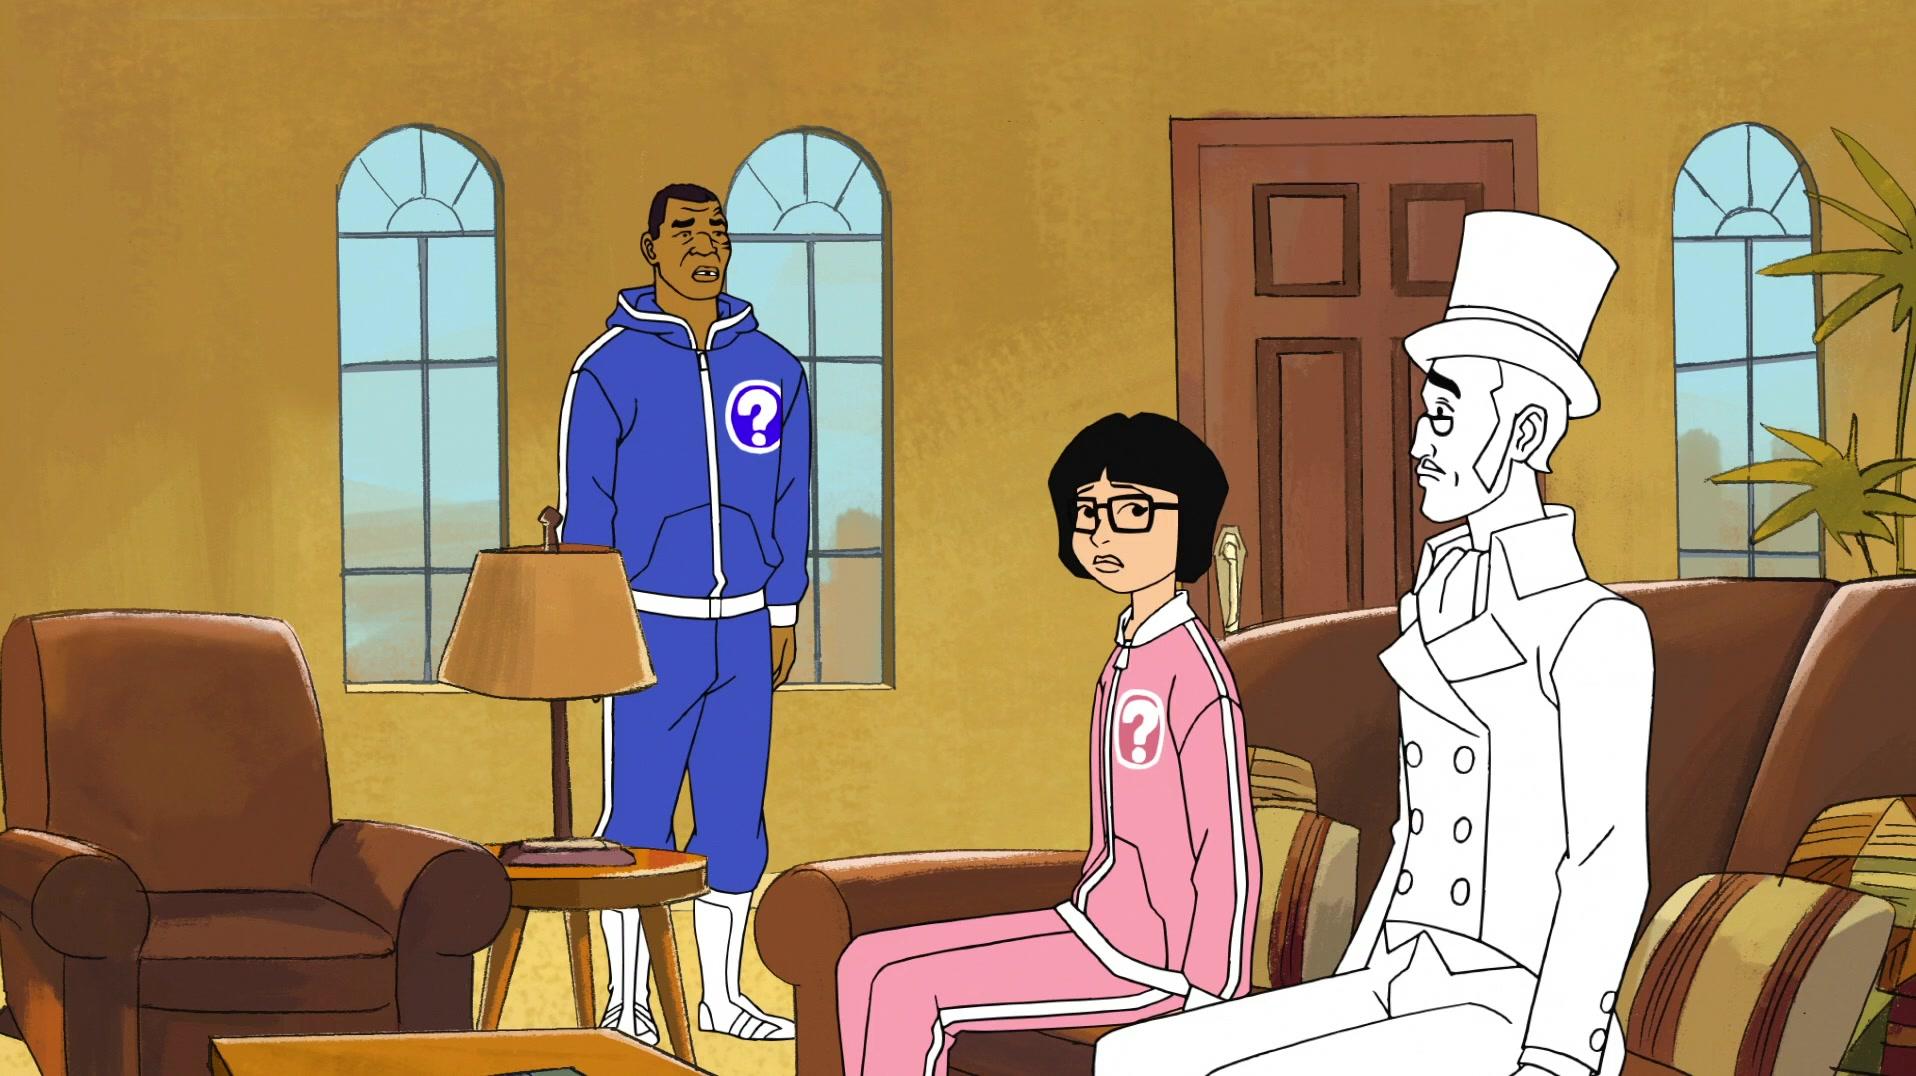 Television Image For Mike Tyson Mysteries Season 2